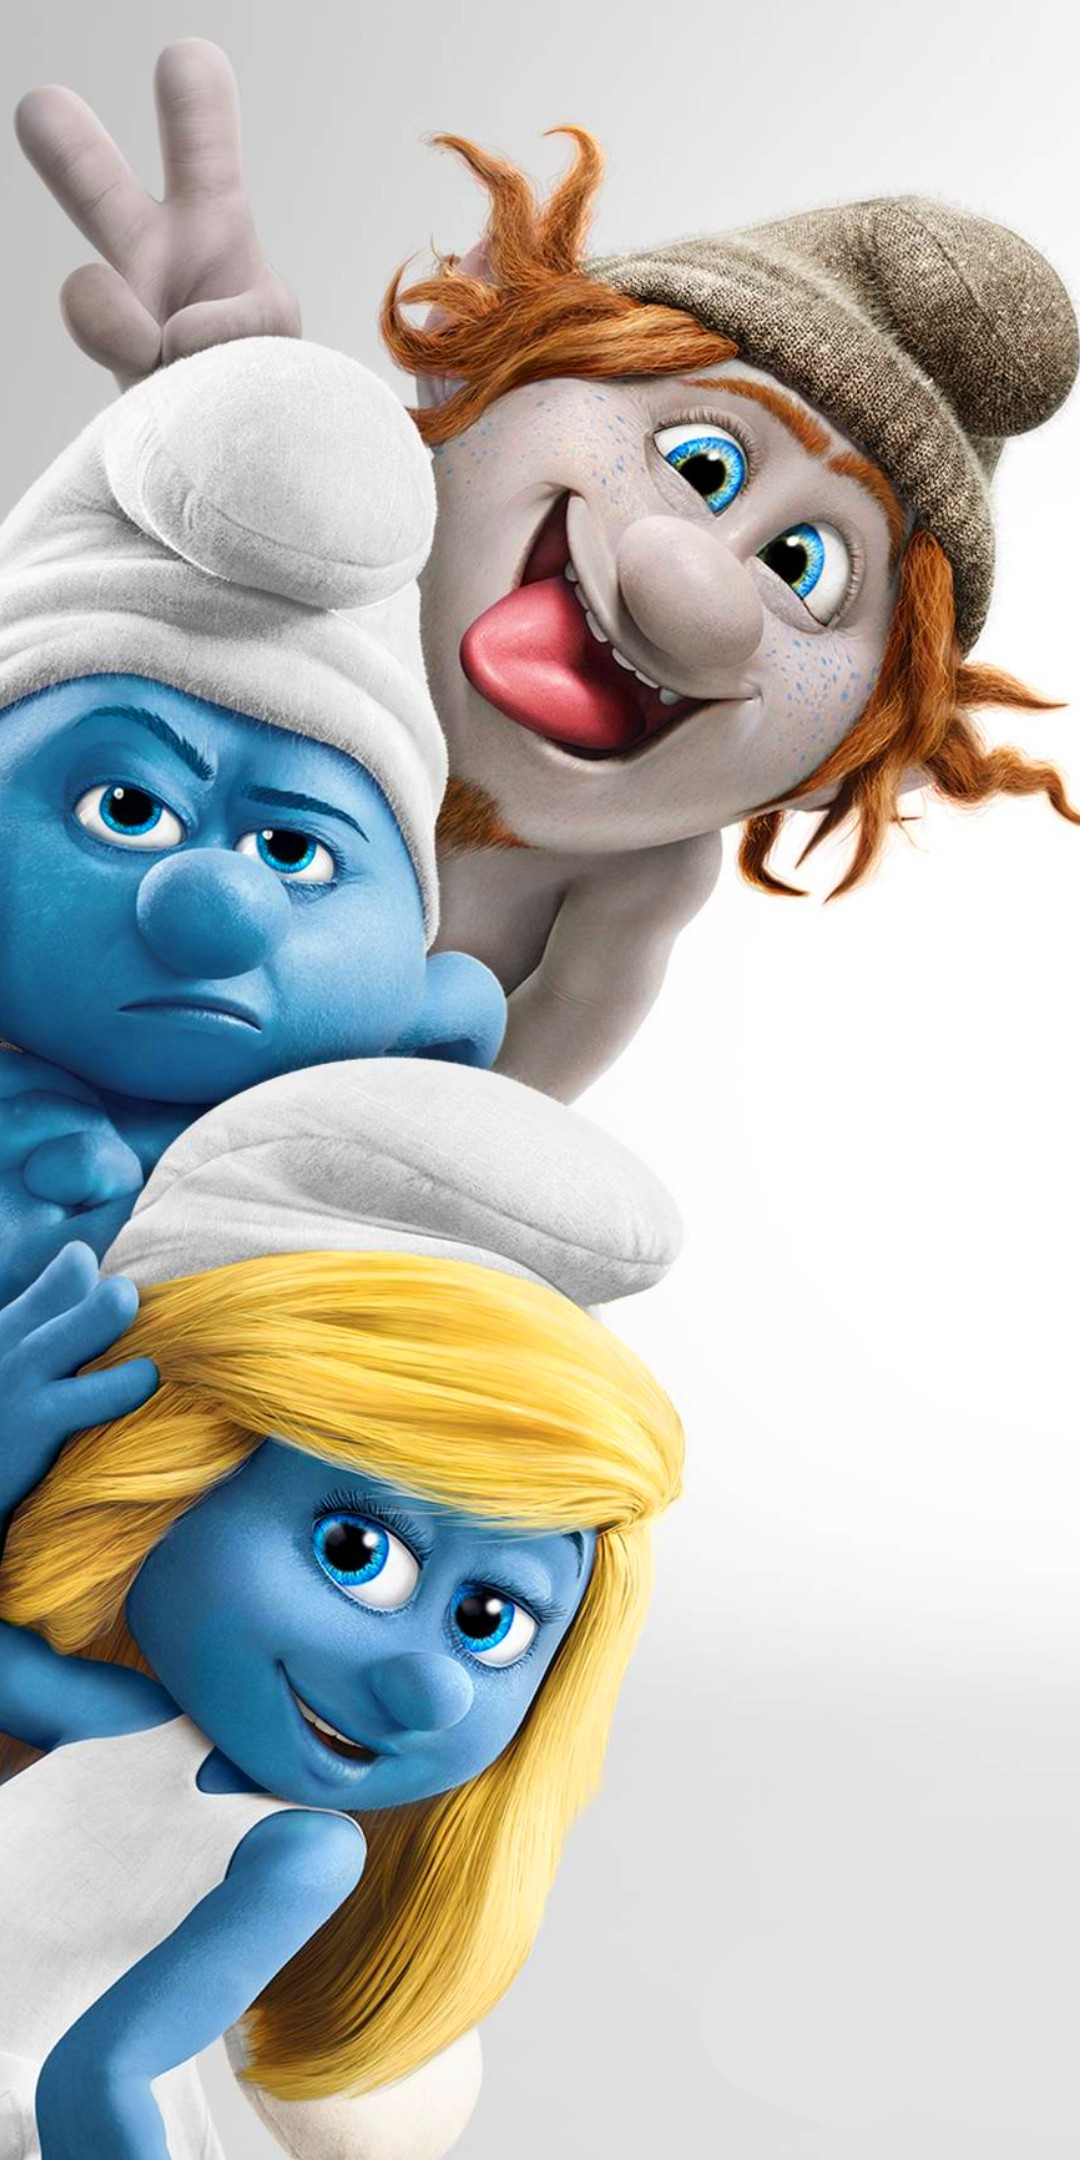 1080x2160 The Smurfs Phone Wallpaper Mobile Abyss